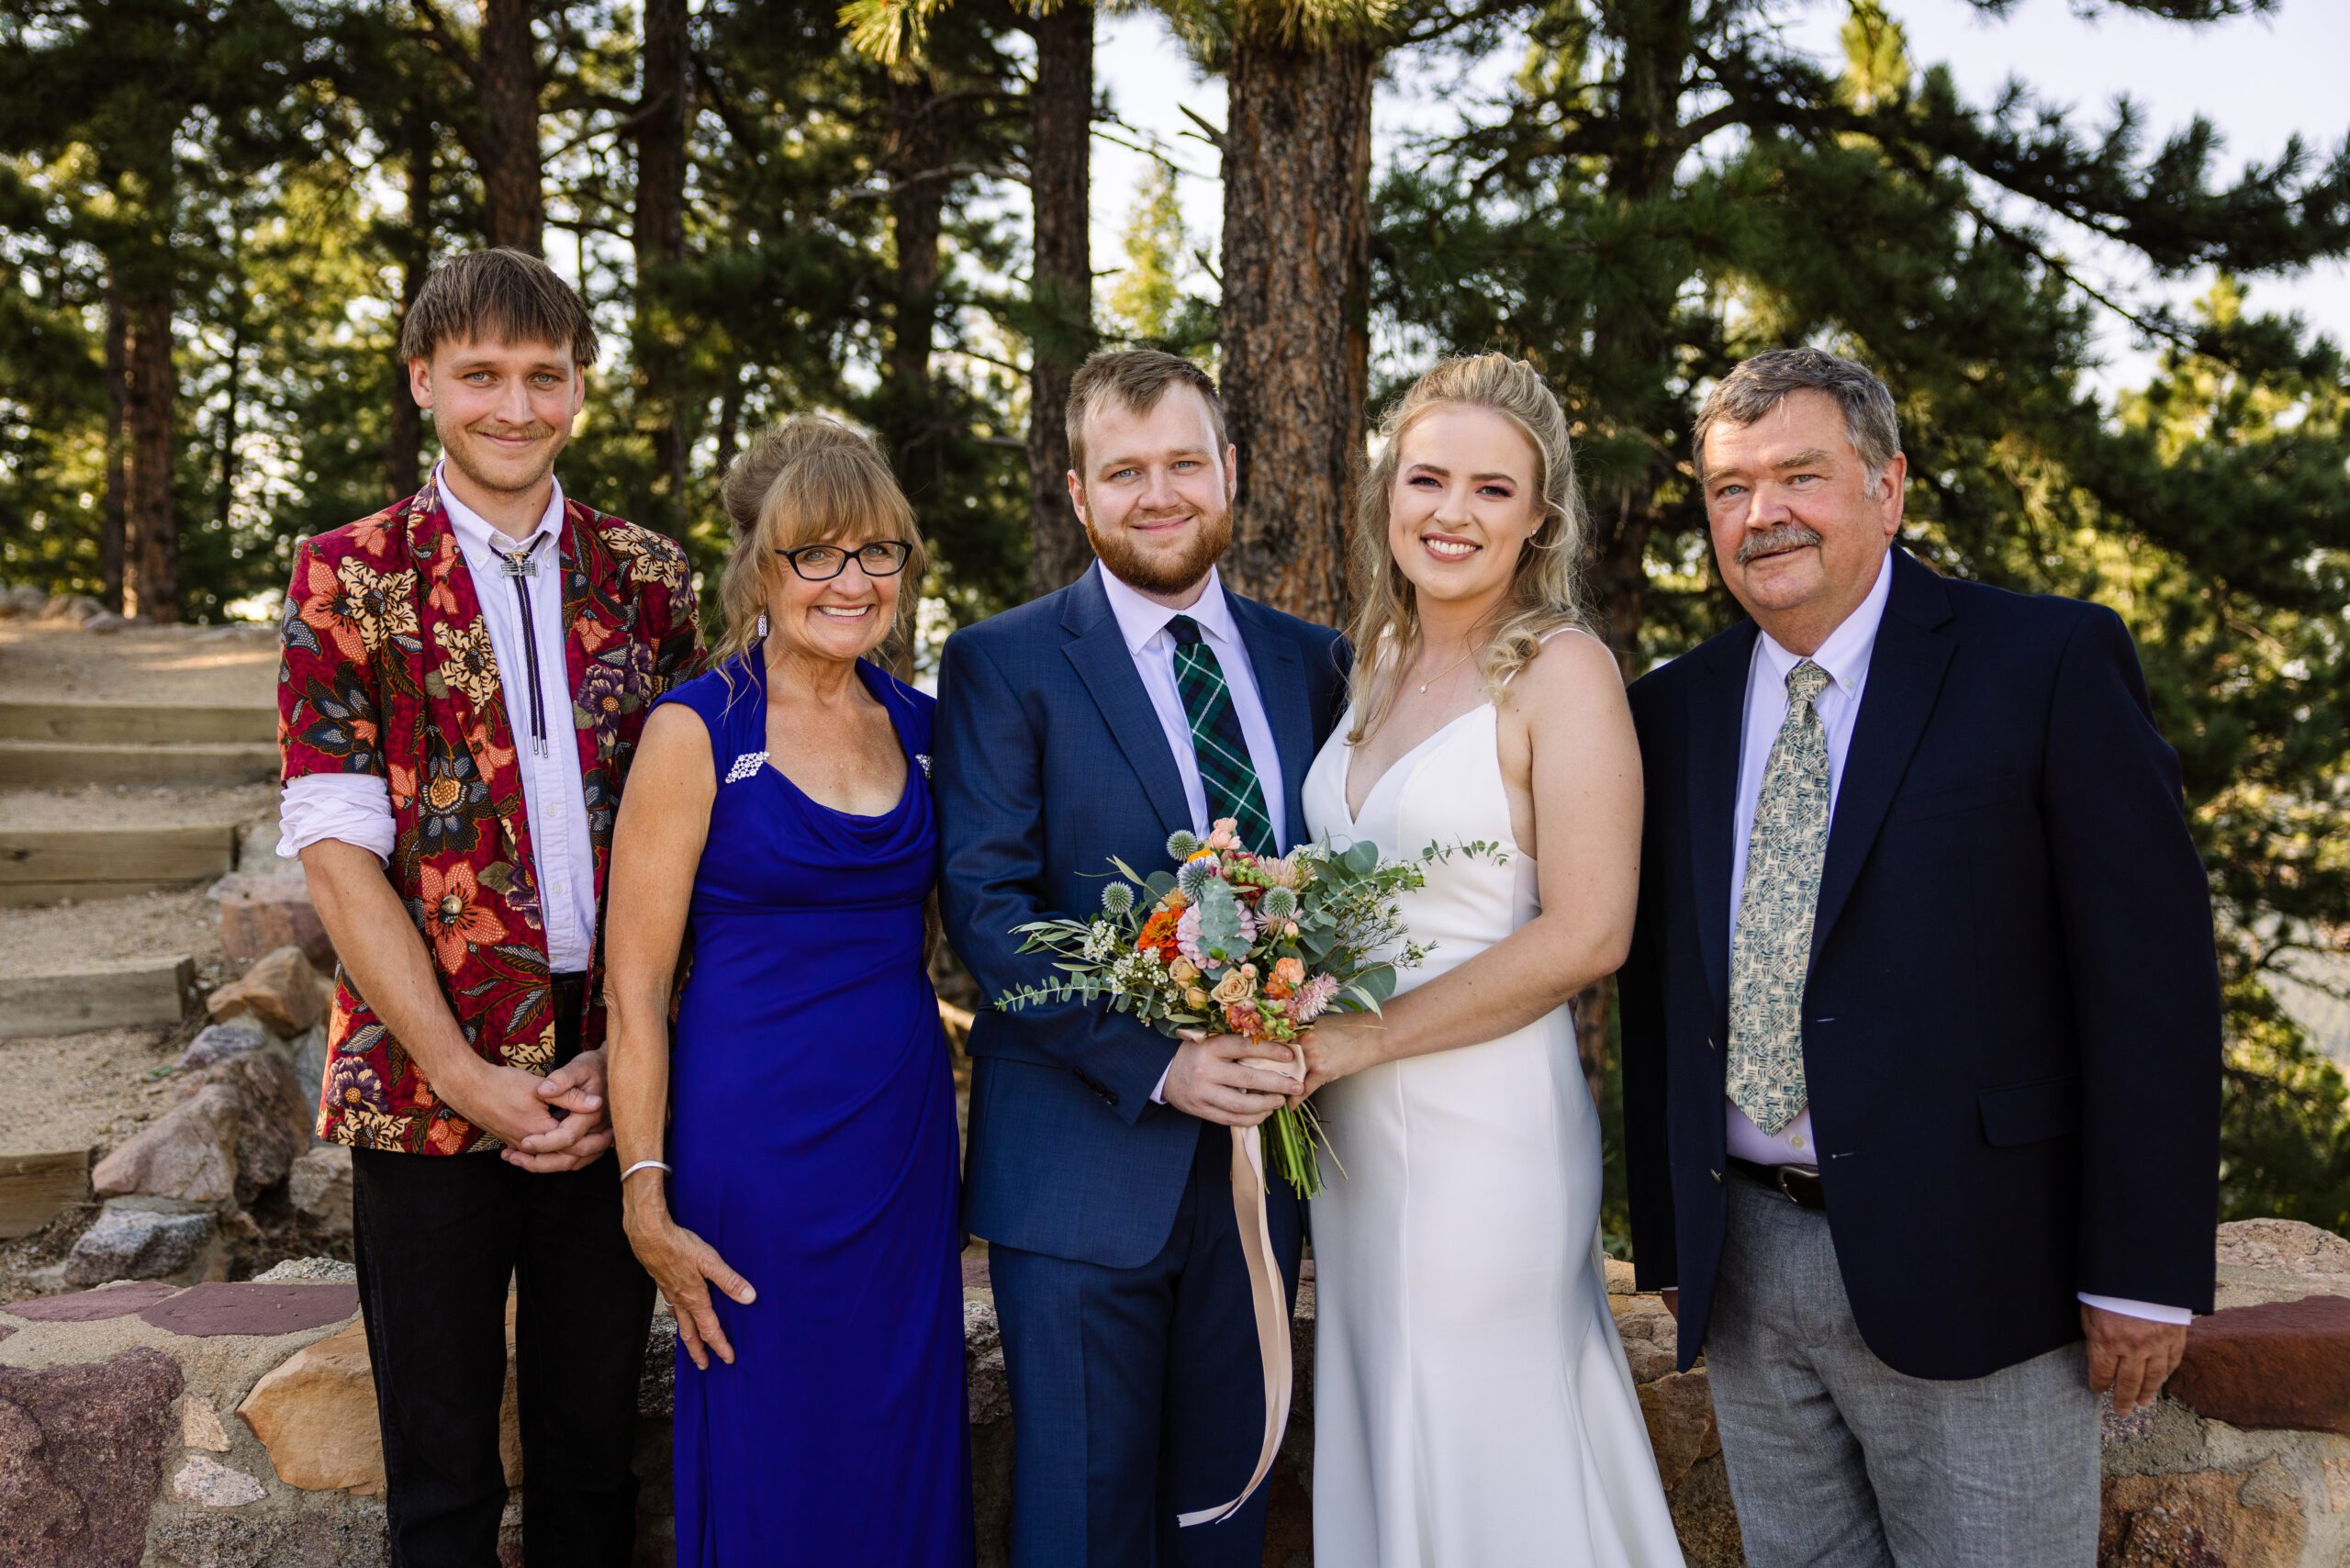 Bride and groom with groom's family at their Sunrise Amphitheater wedding.